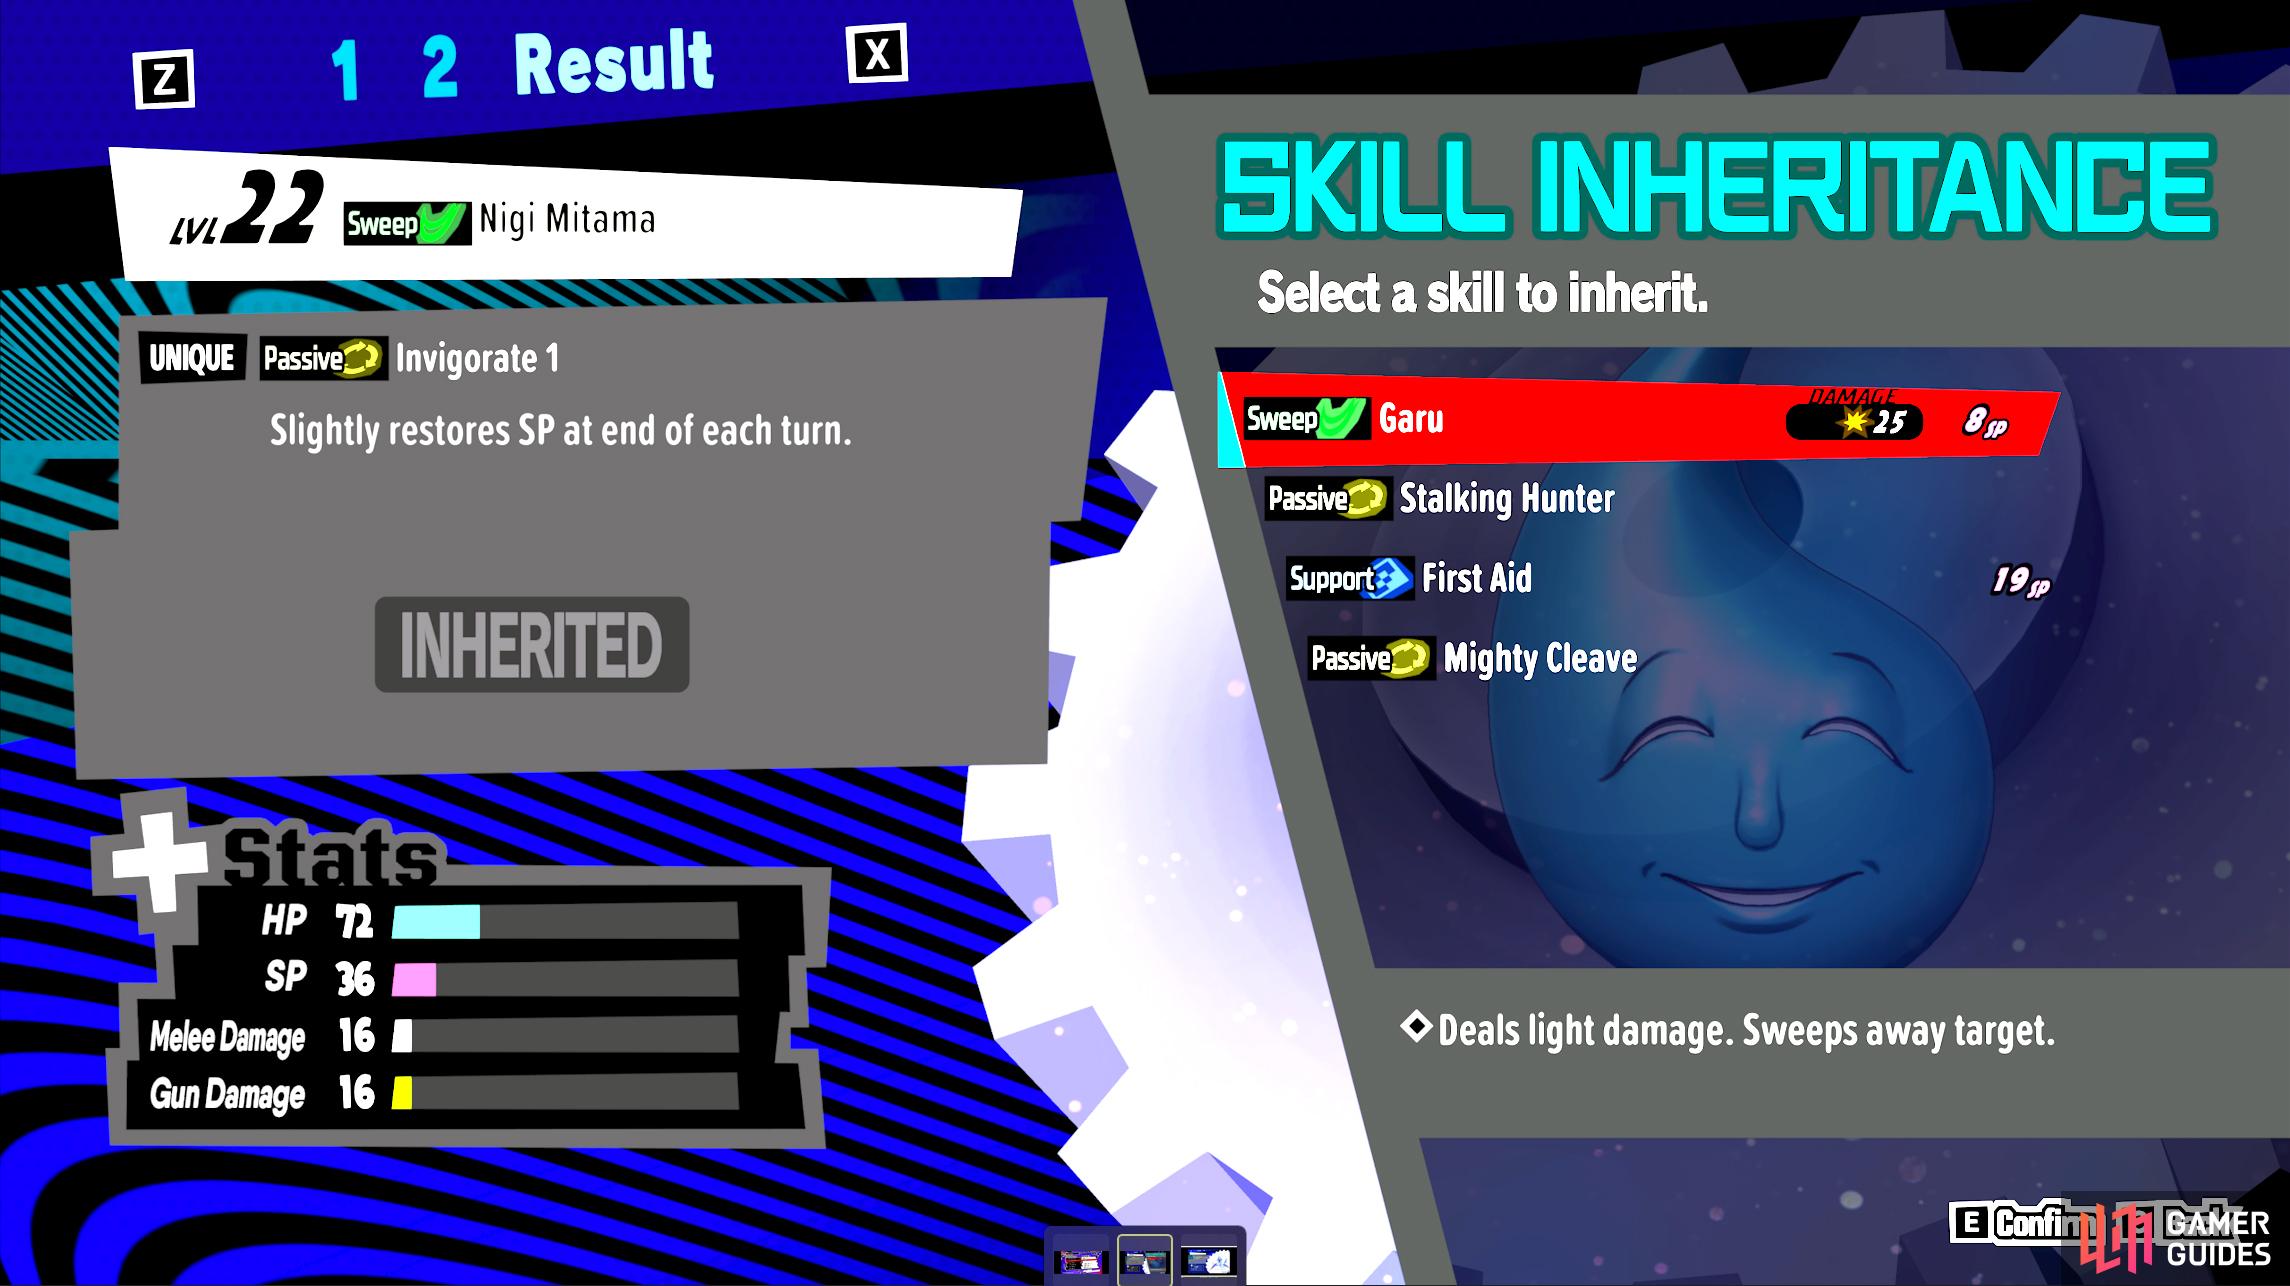 Or you can fuse by result. Once you've selected your Personas, you'll get a skill you can inherit from the previous two you fused.